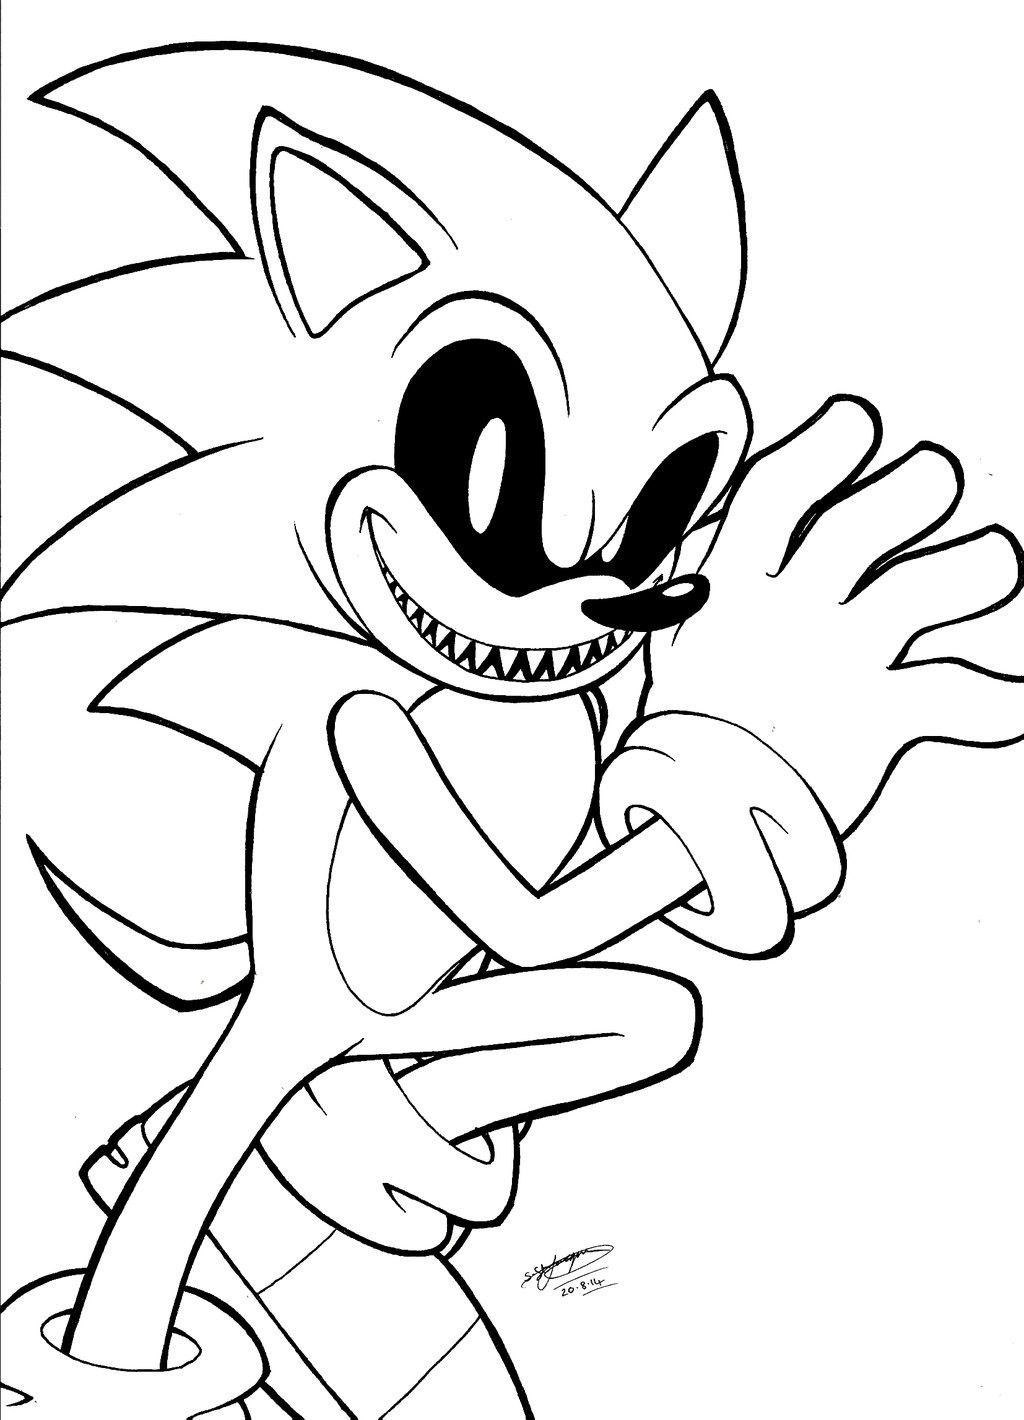 Sonic Exe Coloring Page | Coloring Pages, Coloring avec Coloriage Sonic